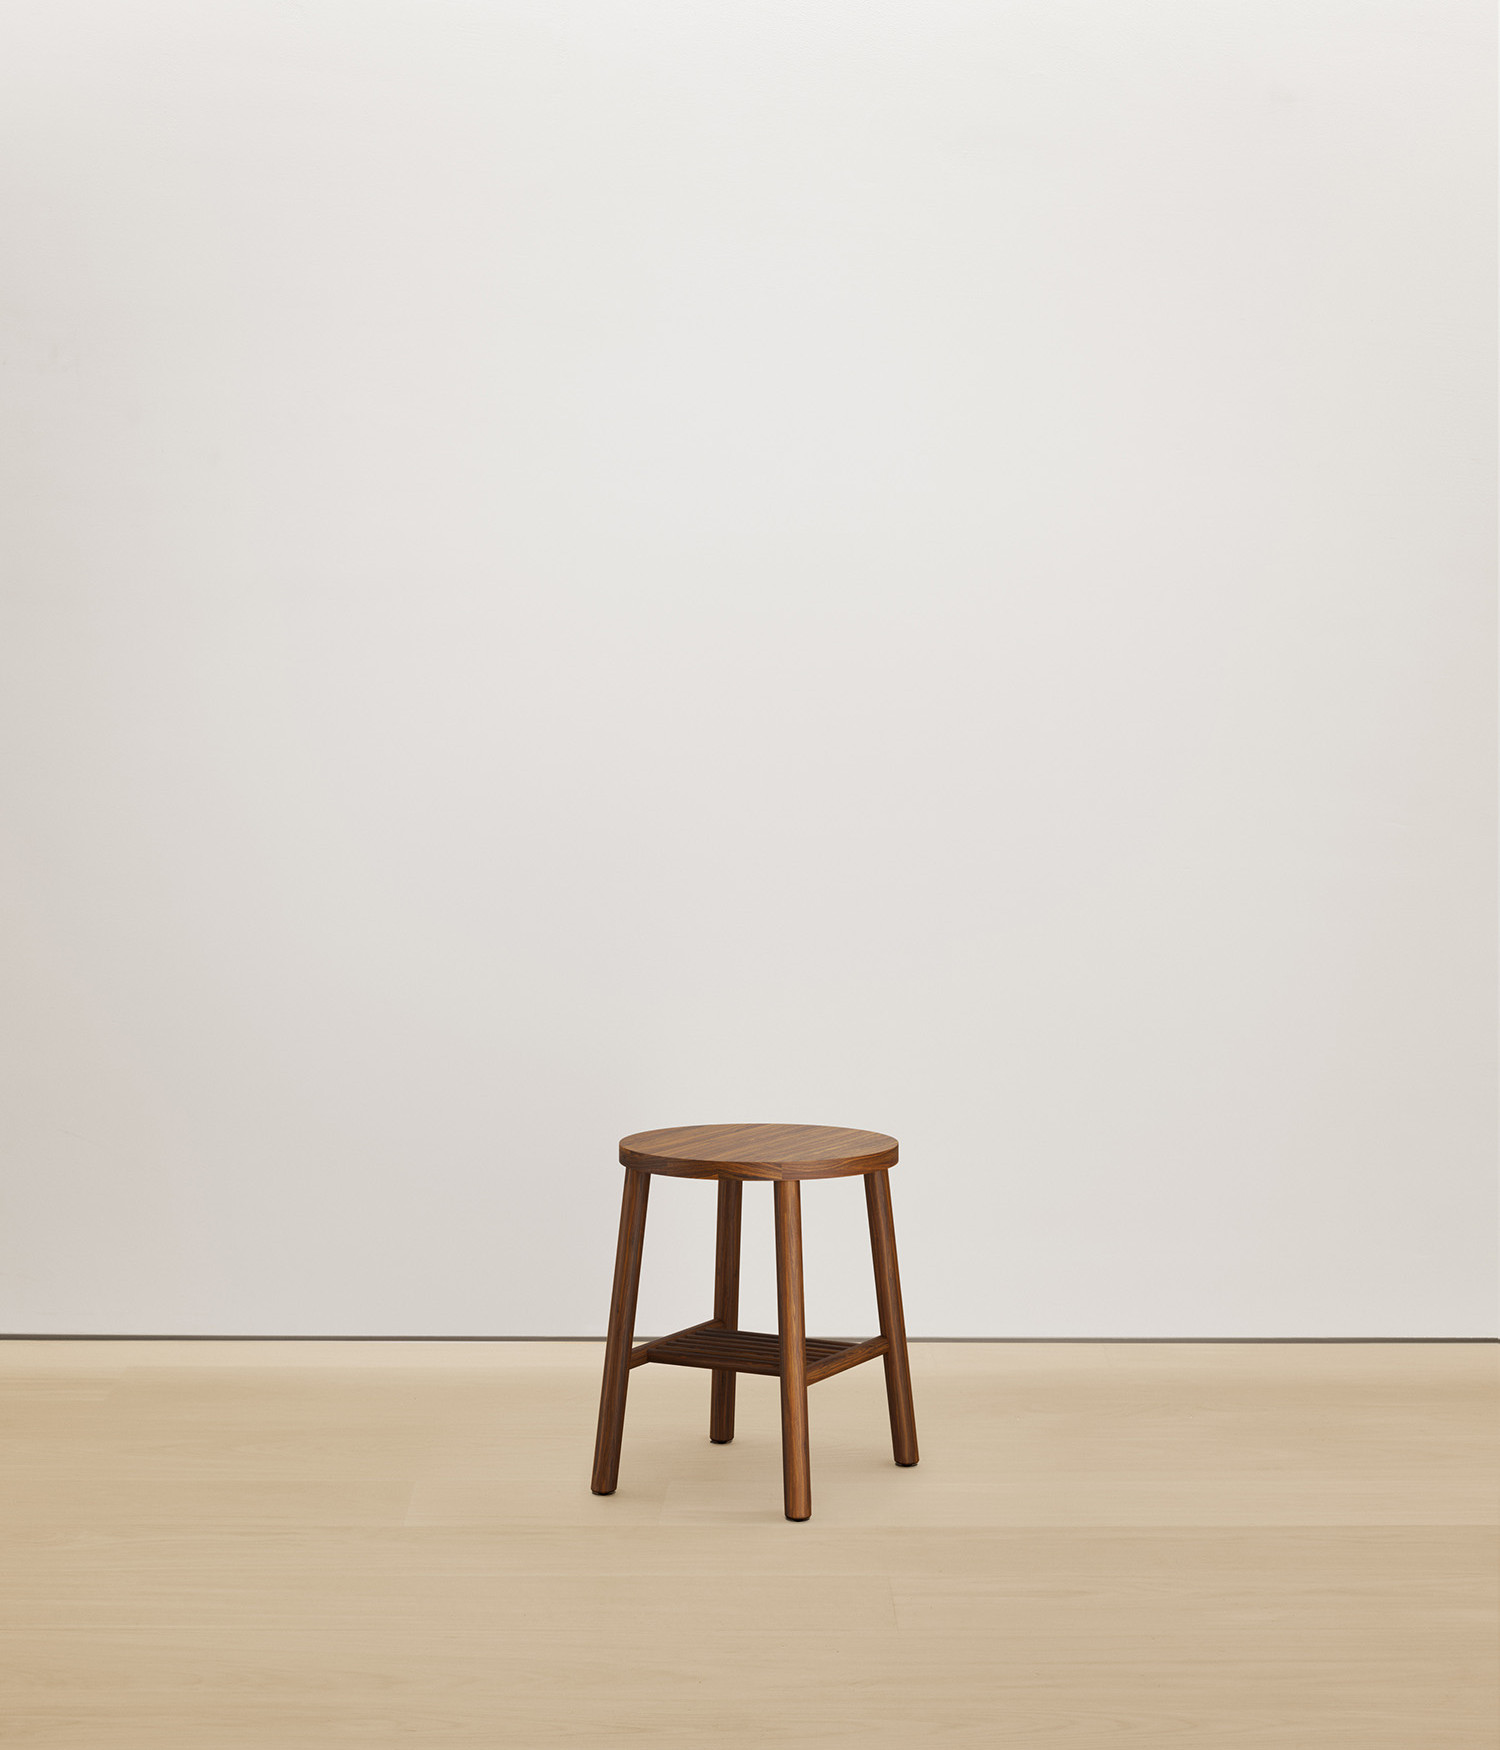  walnut stool with solid wood seat